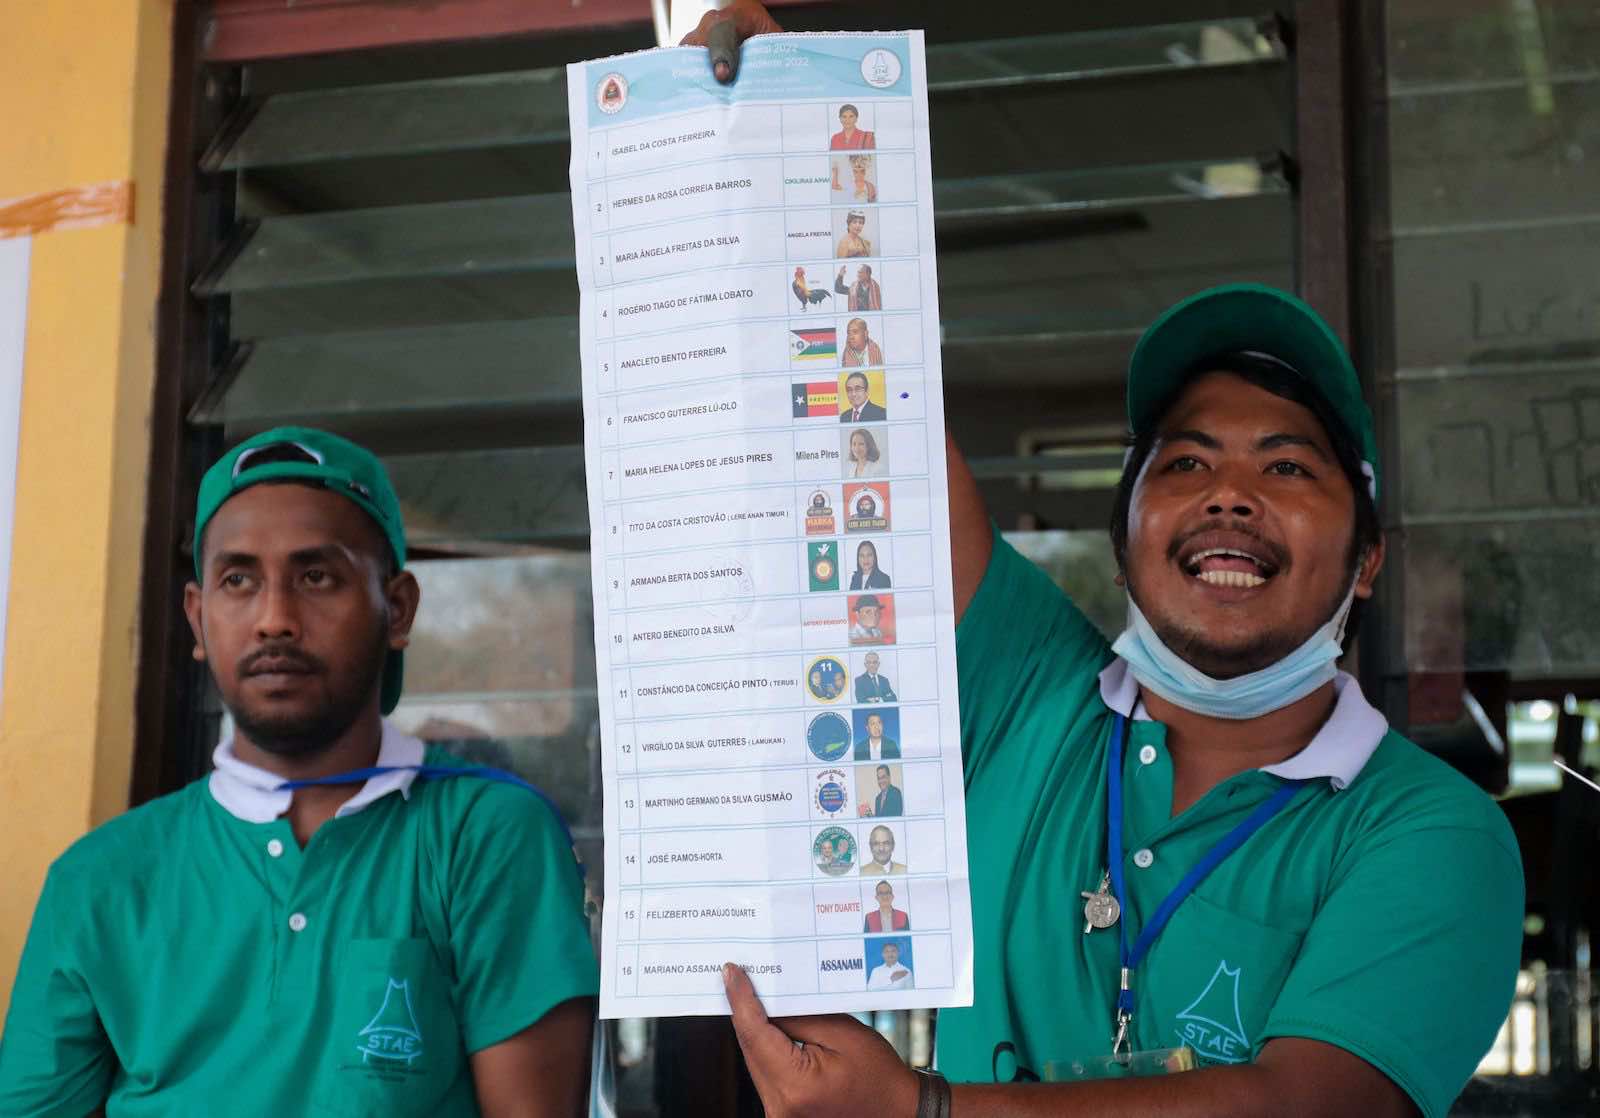 Showing a ballot during the presidential election in Dili on 19 March (Valentino Dariel Sousa/AFP via Getty Images)